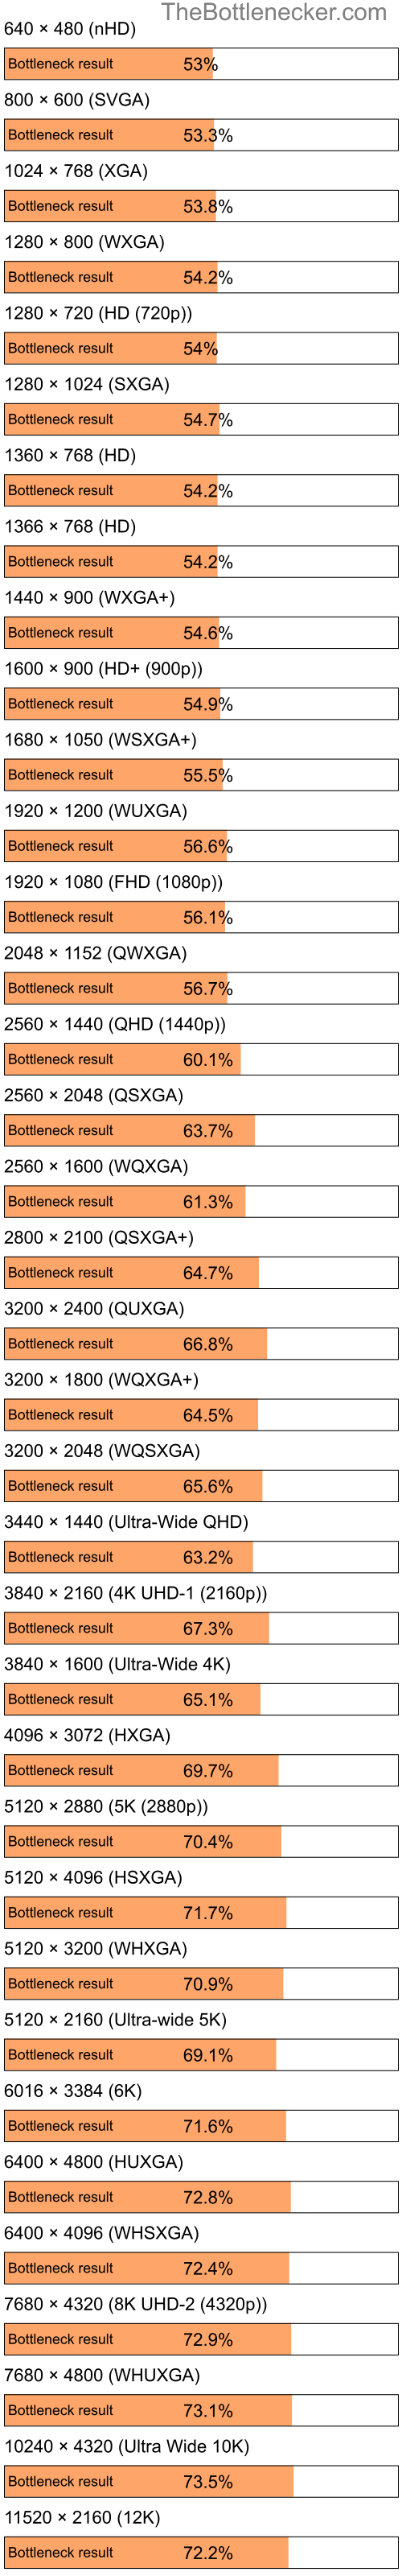 Bottleneck results by resolution for Intel Pentium 4 and AMD M880G with Mobility Radeon HD 4200 in Processor Intense Tasks